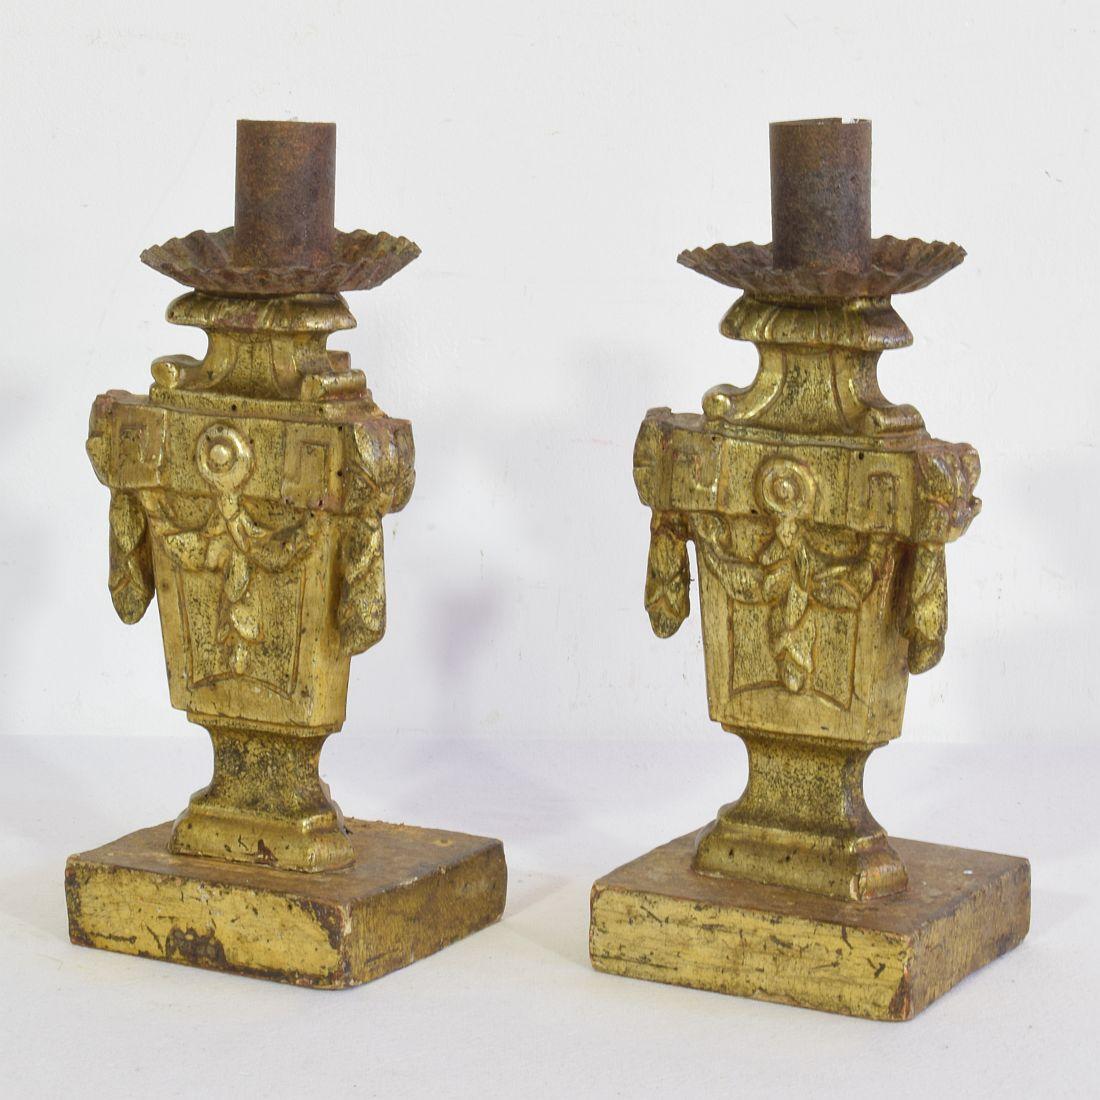 Pair of Small 18th Century Italian Neoclassical Candleholders / Candlesticks In Good Condition For Sale In Buisson, FR